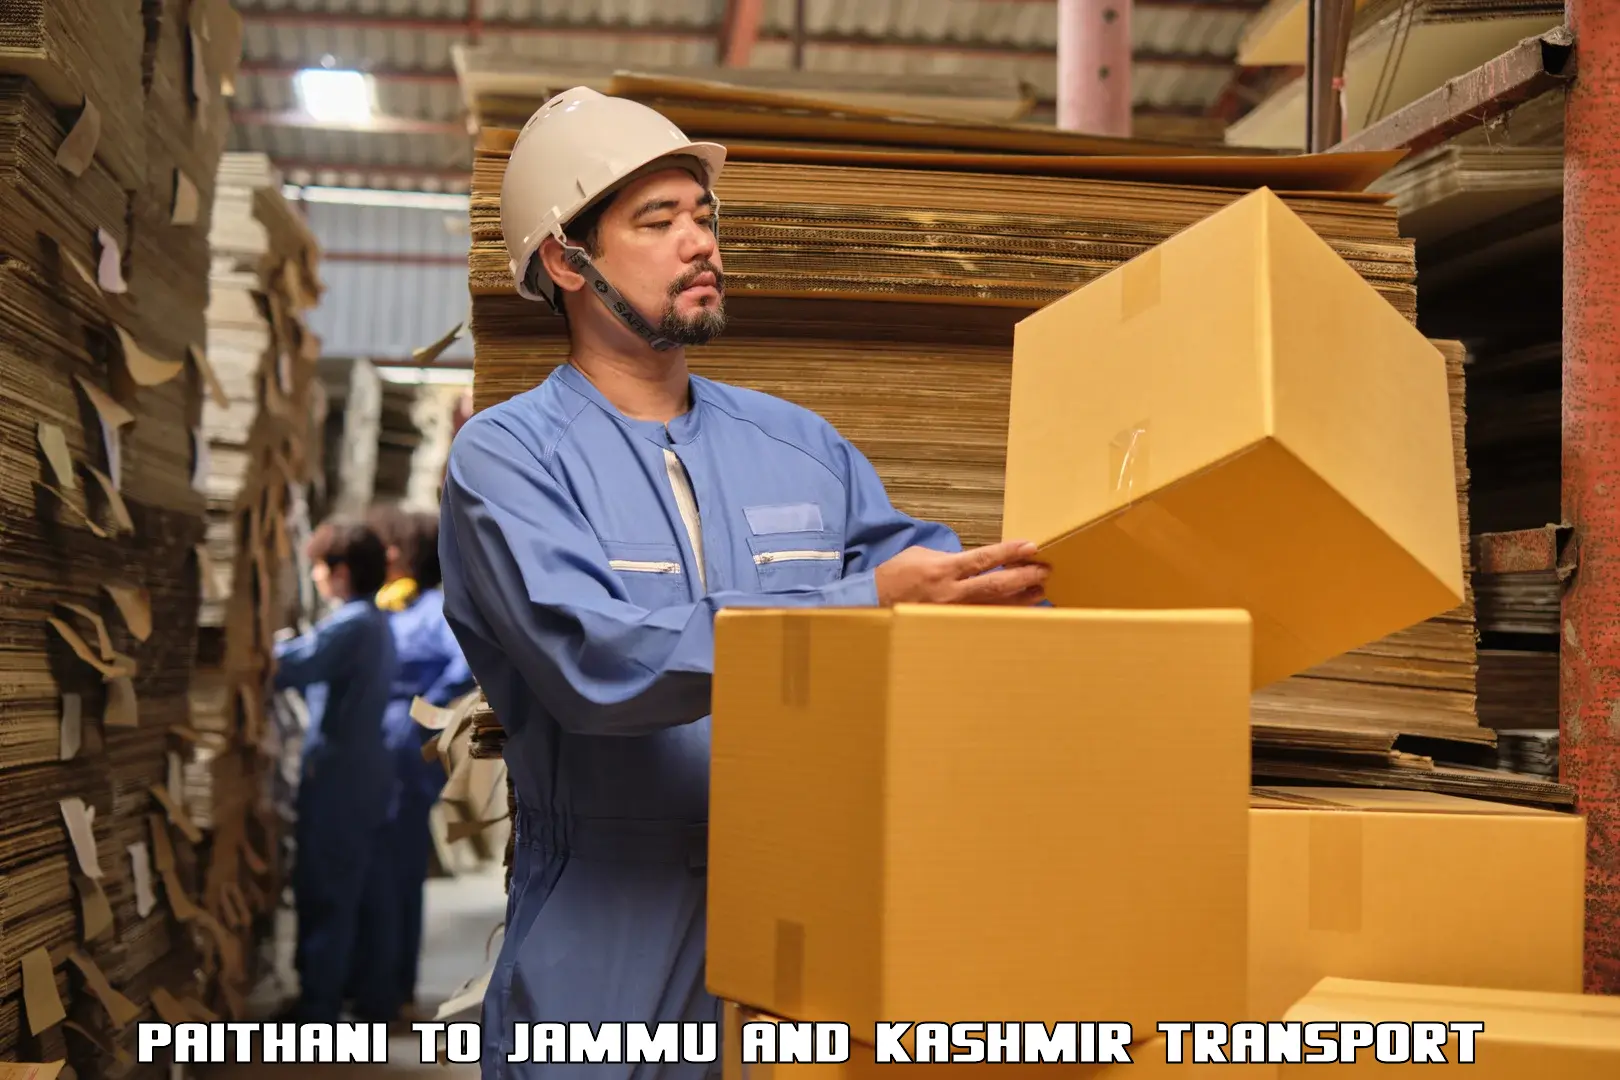 Goods delivery service Paithani to Pulwama